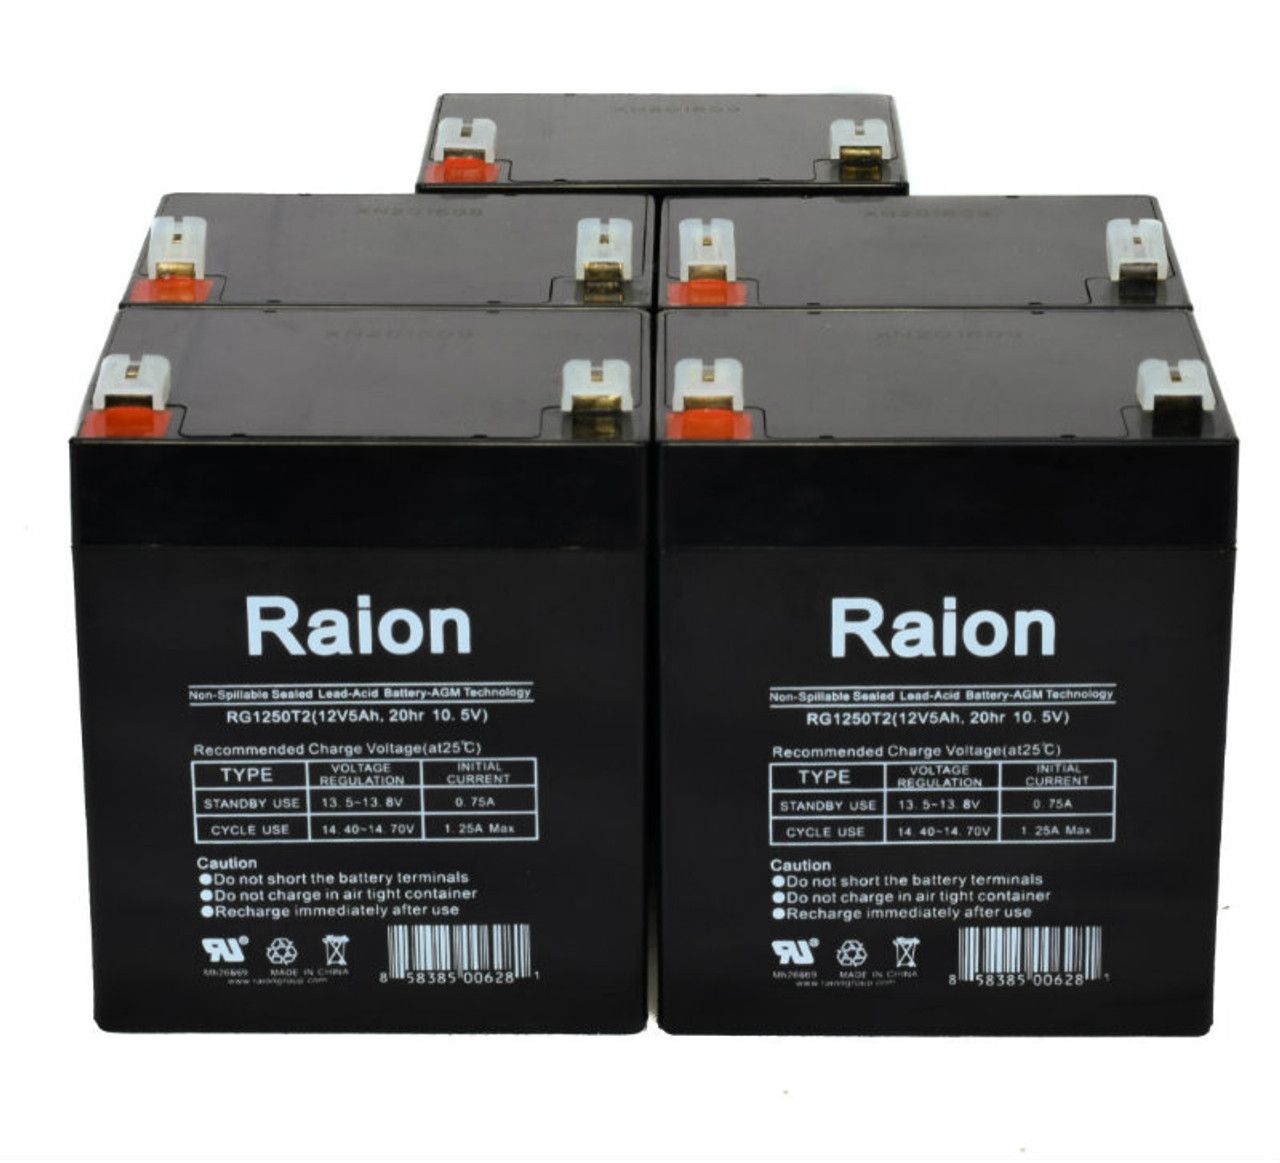 Raion Power RG1250T1 Replacement Battery for Plus Power PP12-4.5 F1 - (5 Pack)